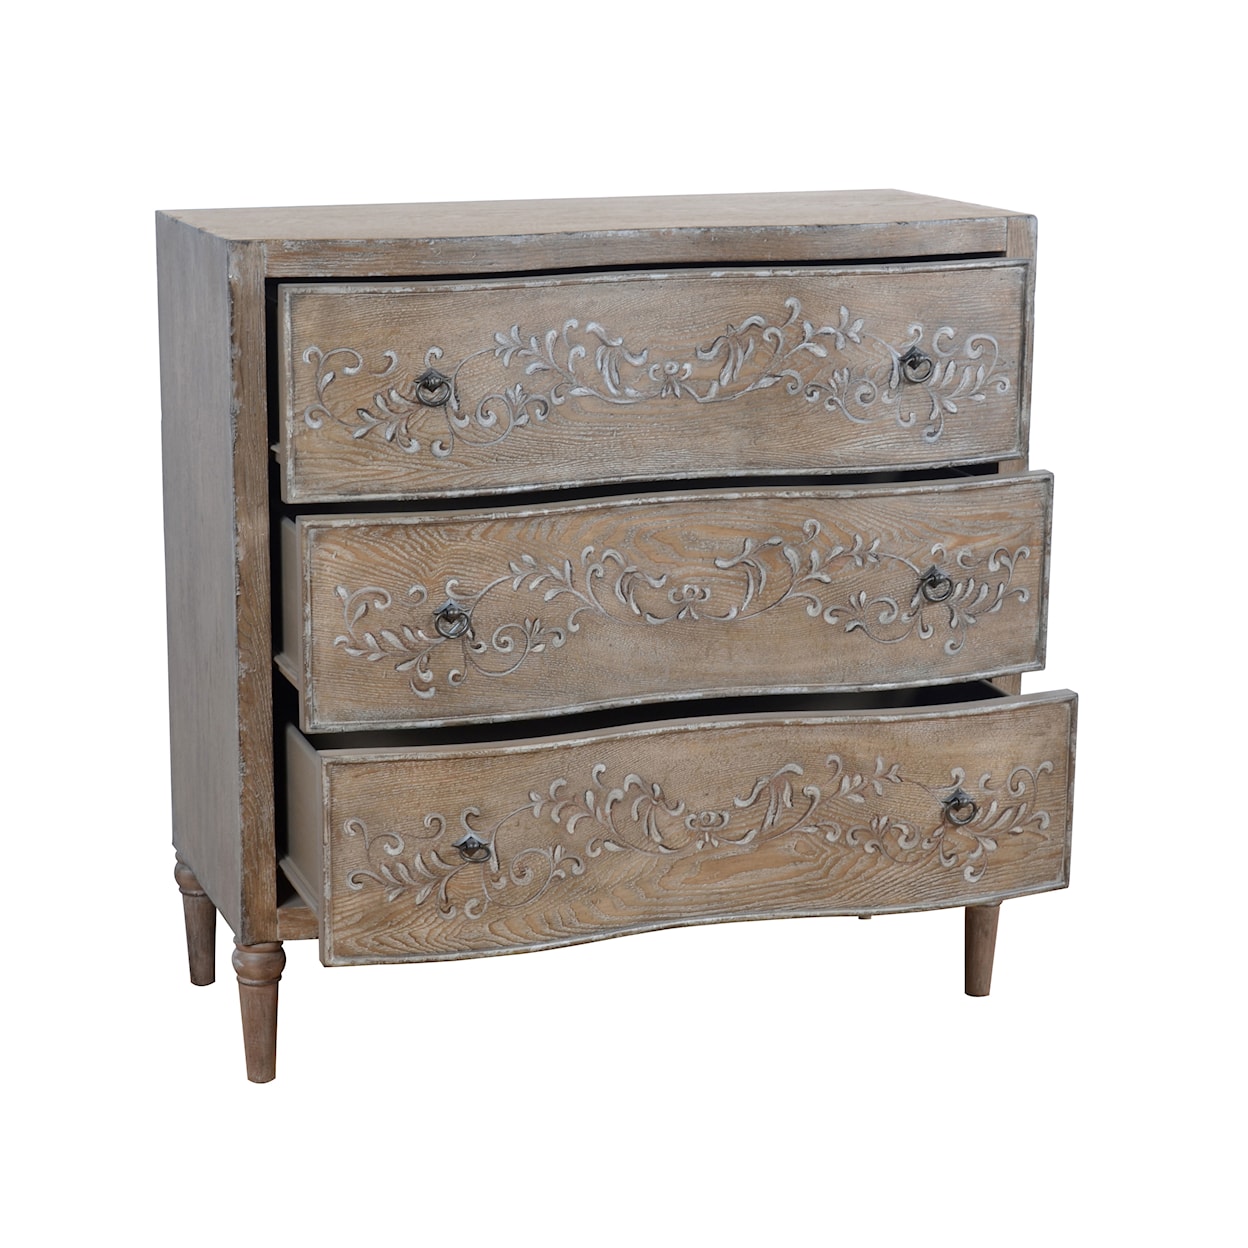 Accentrics Home Accents Three Drawer Chest